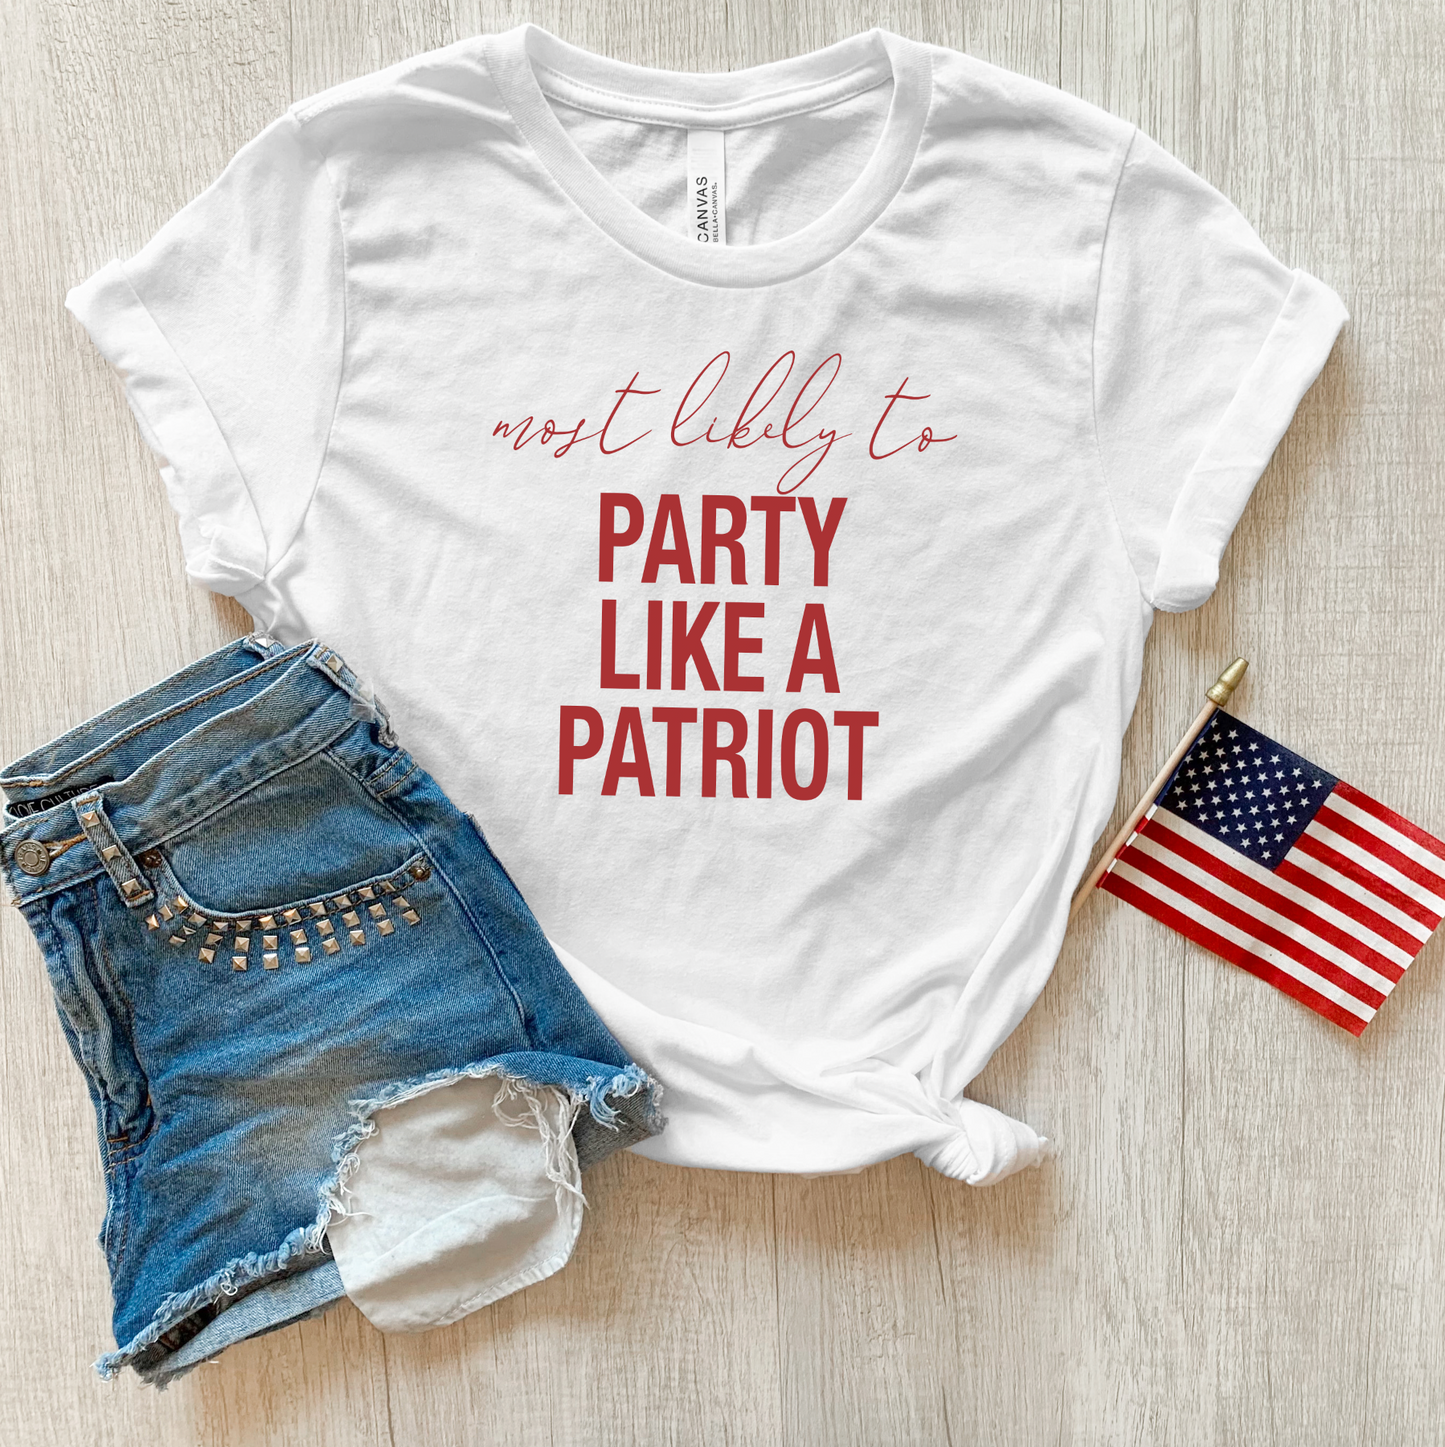 Most likely to party like a patriot